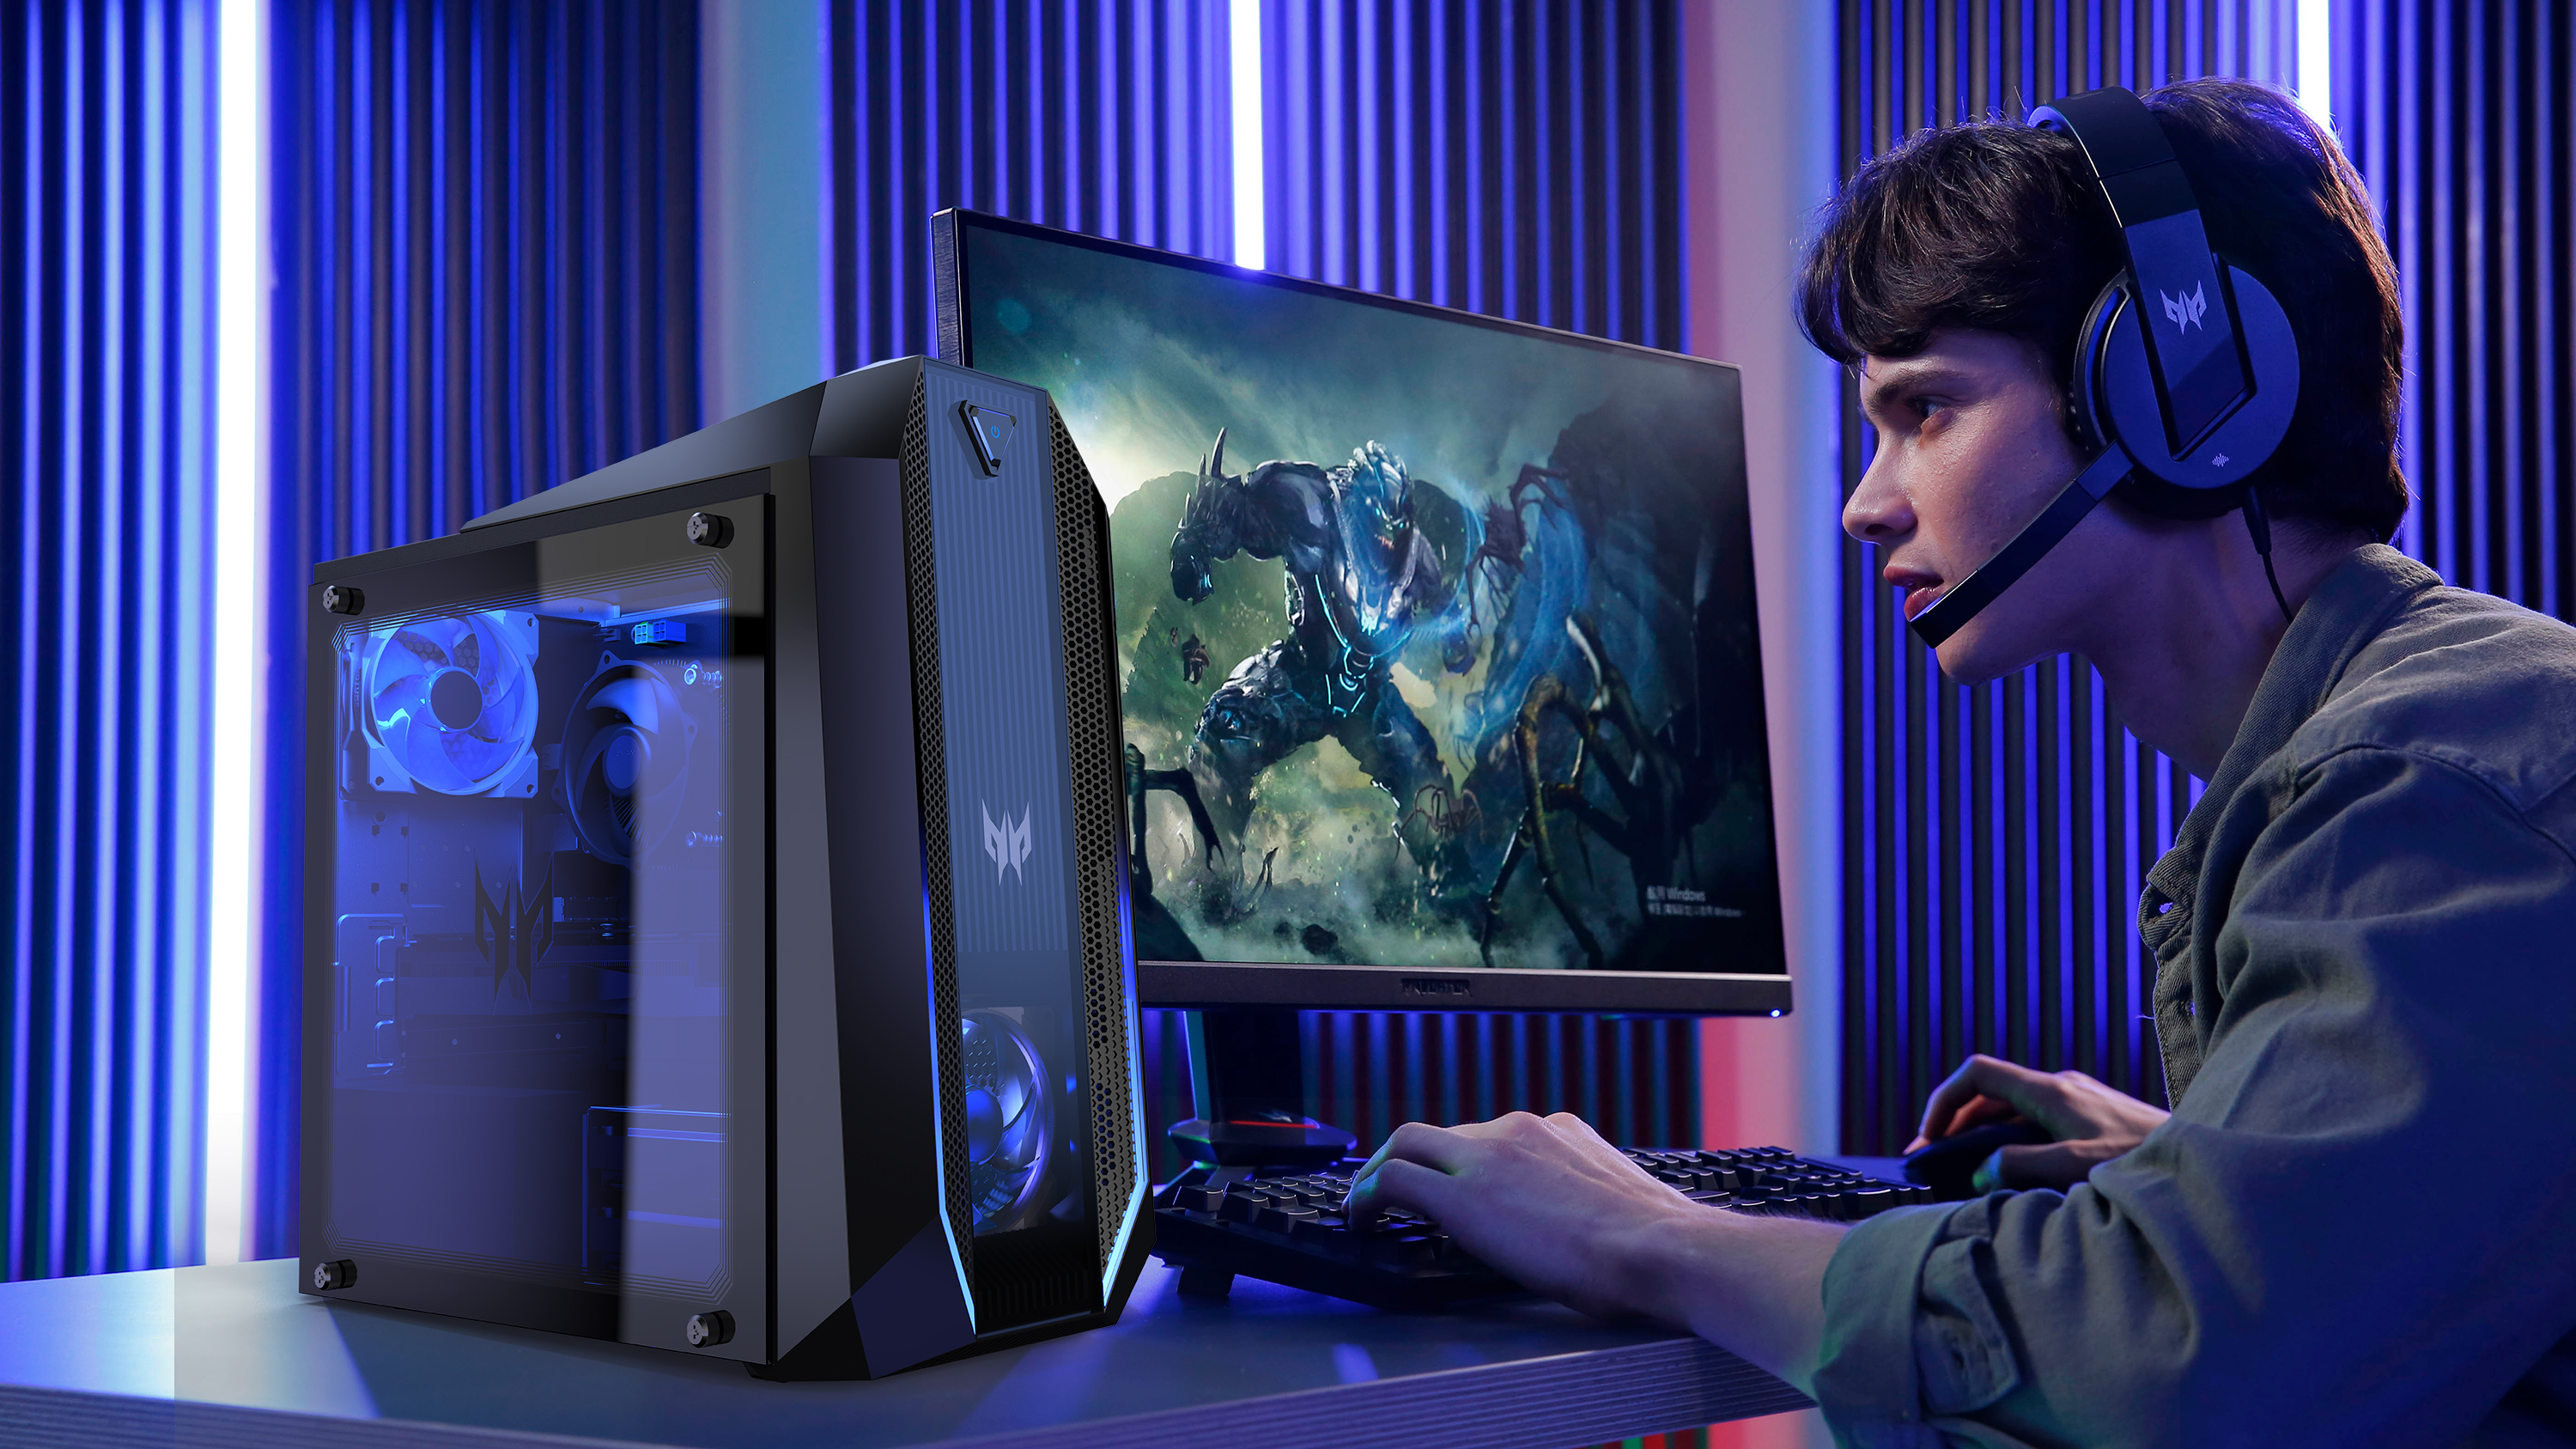 Acer Refreshes The Predator Orion 3000 Gaming Desktop With 10th Generation Intel Cpus Prices Start At 999 Notebookcheck Net News